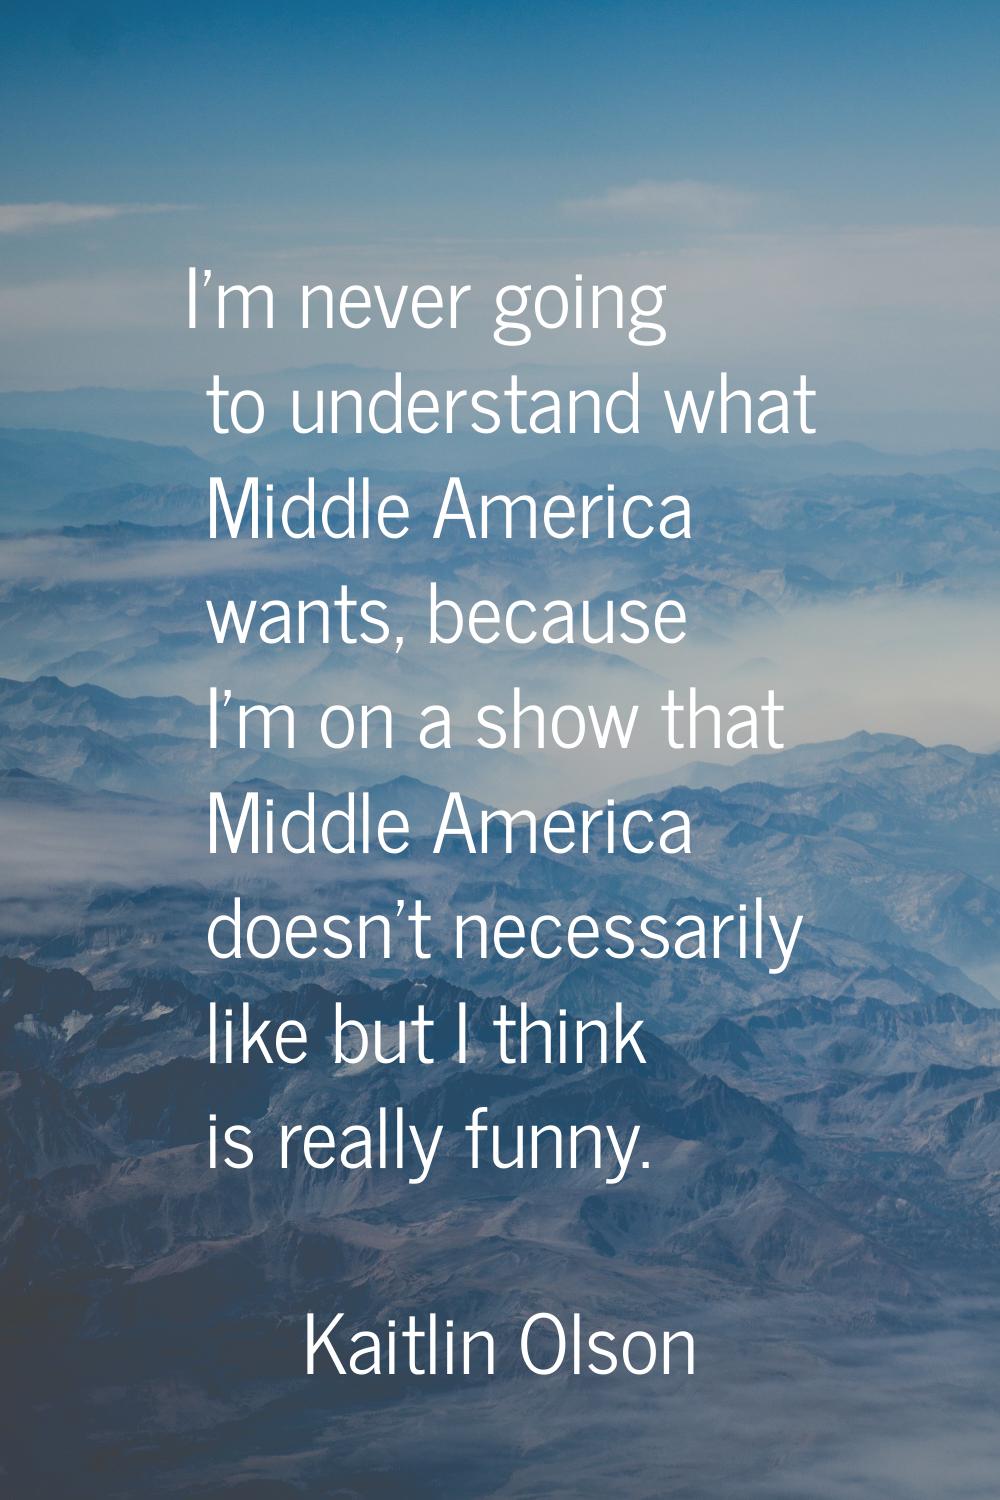 I'm never going to understand what Middle America wants, because I'm on a show that Middle America 